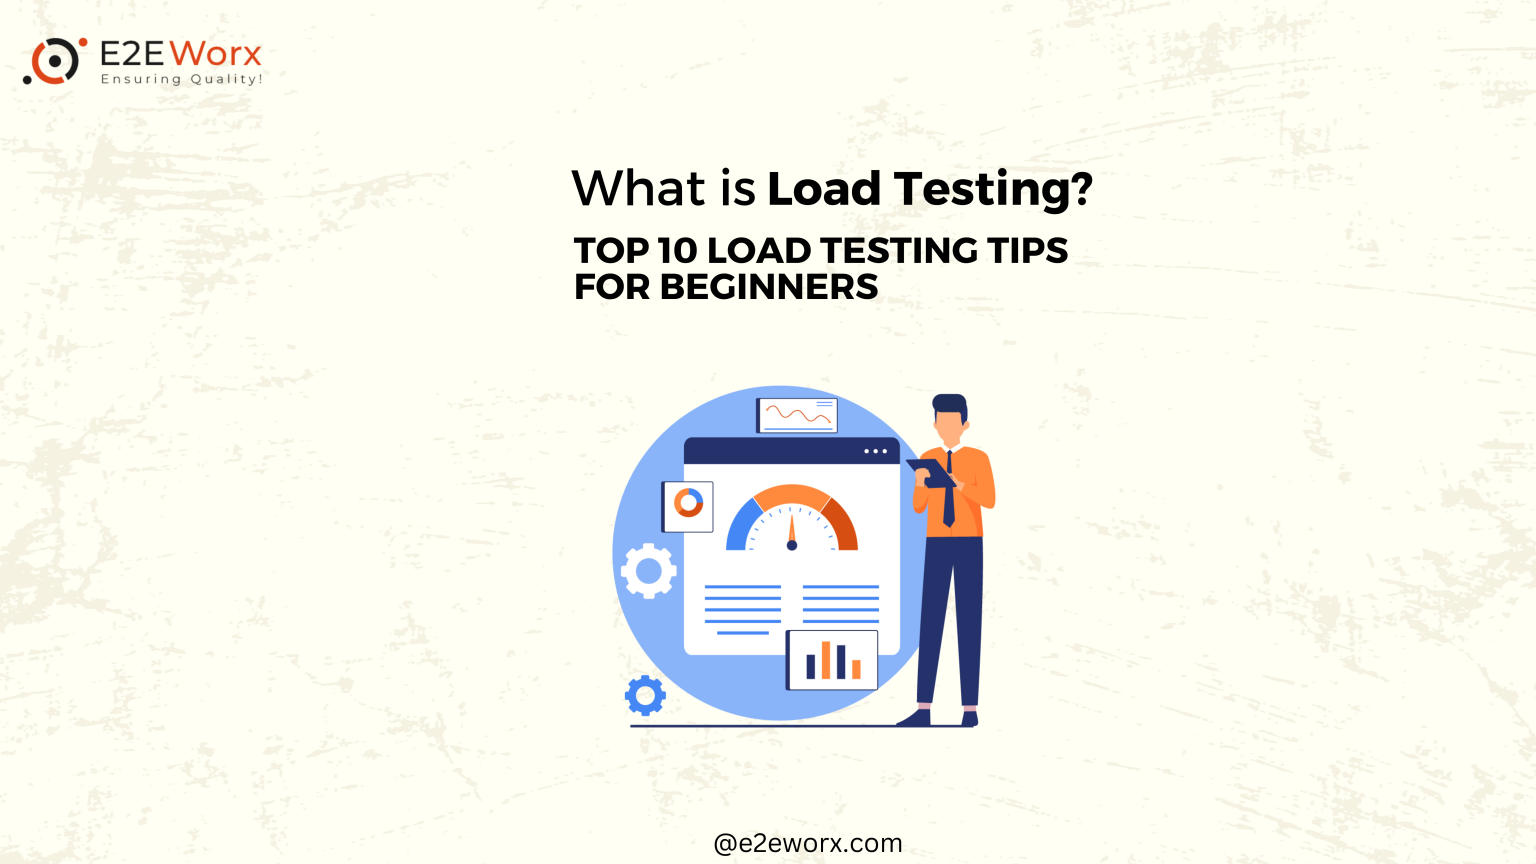 What is Load Testing Top 10 Load Testing Tips for Beginners - E2EWorx Ensuring Quality